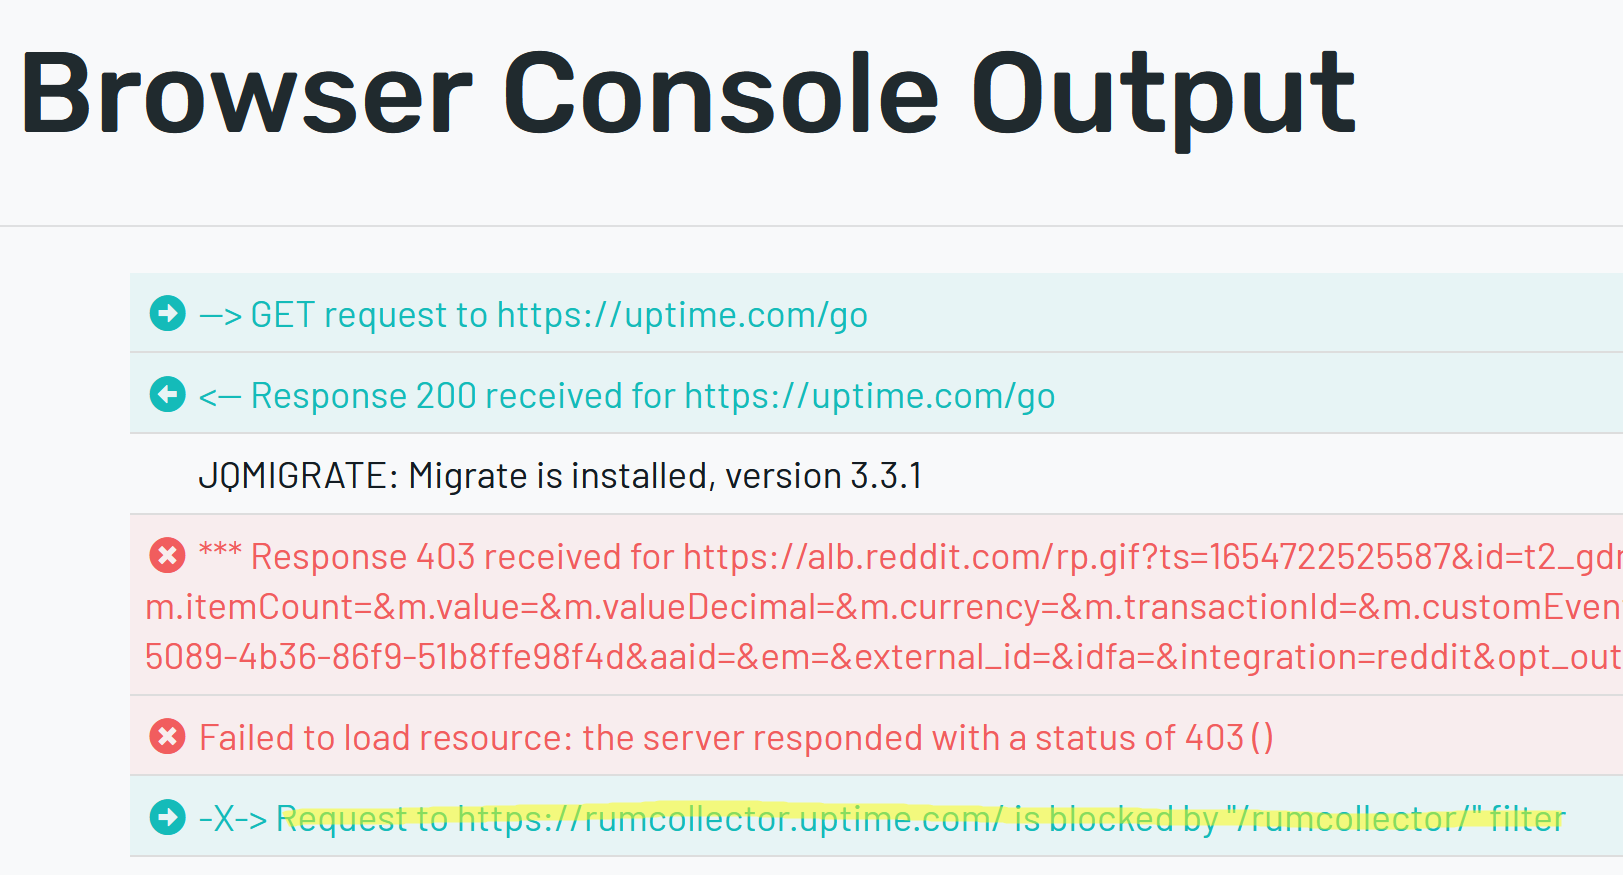 console-output-filtering-urls.png